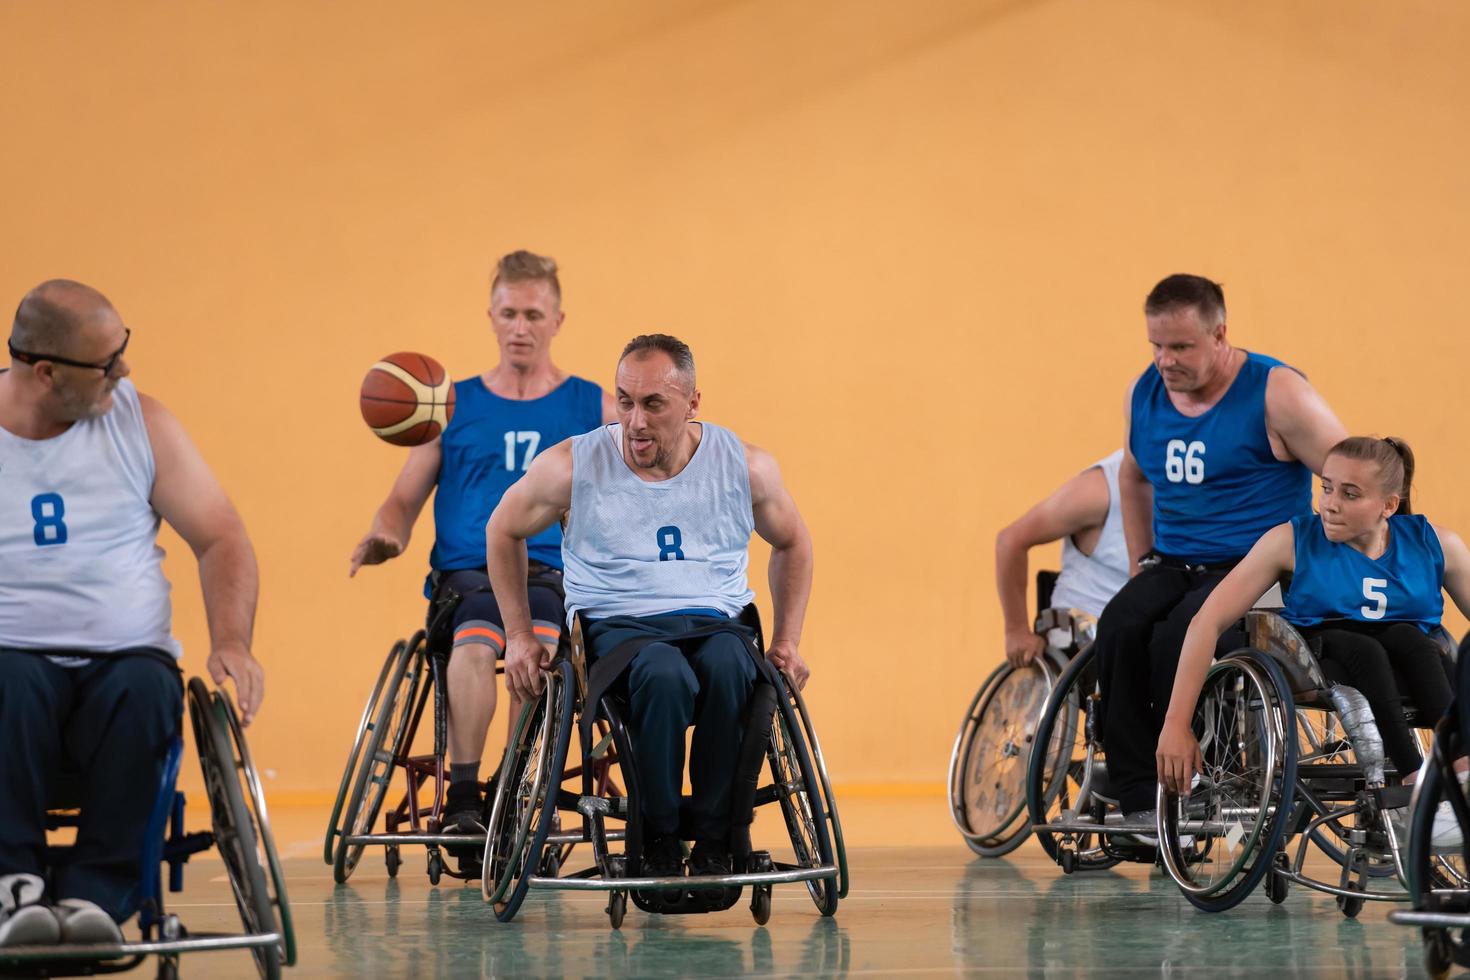 Disabled War veterans mixed race opposing basketball teams in wheelchairs photographed in action while playing an important match in a modern hall. photo